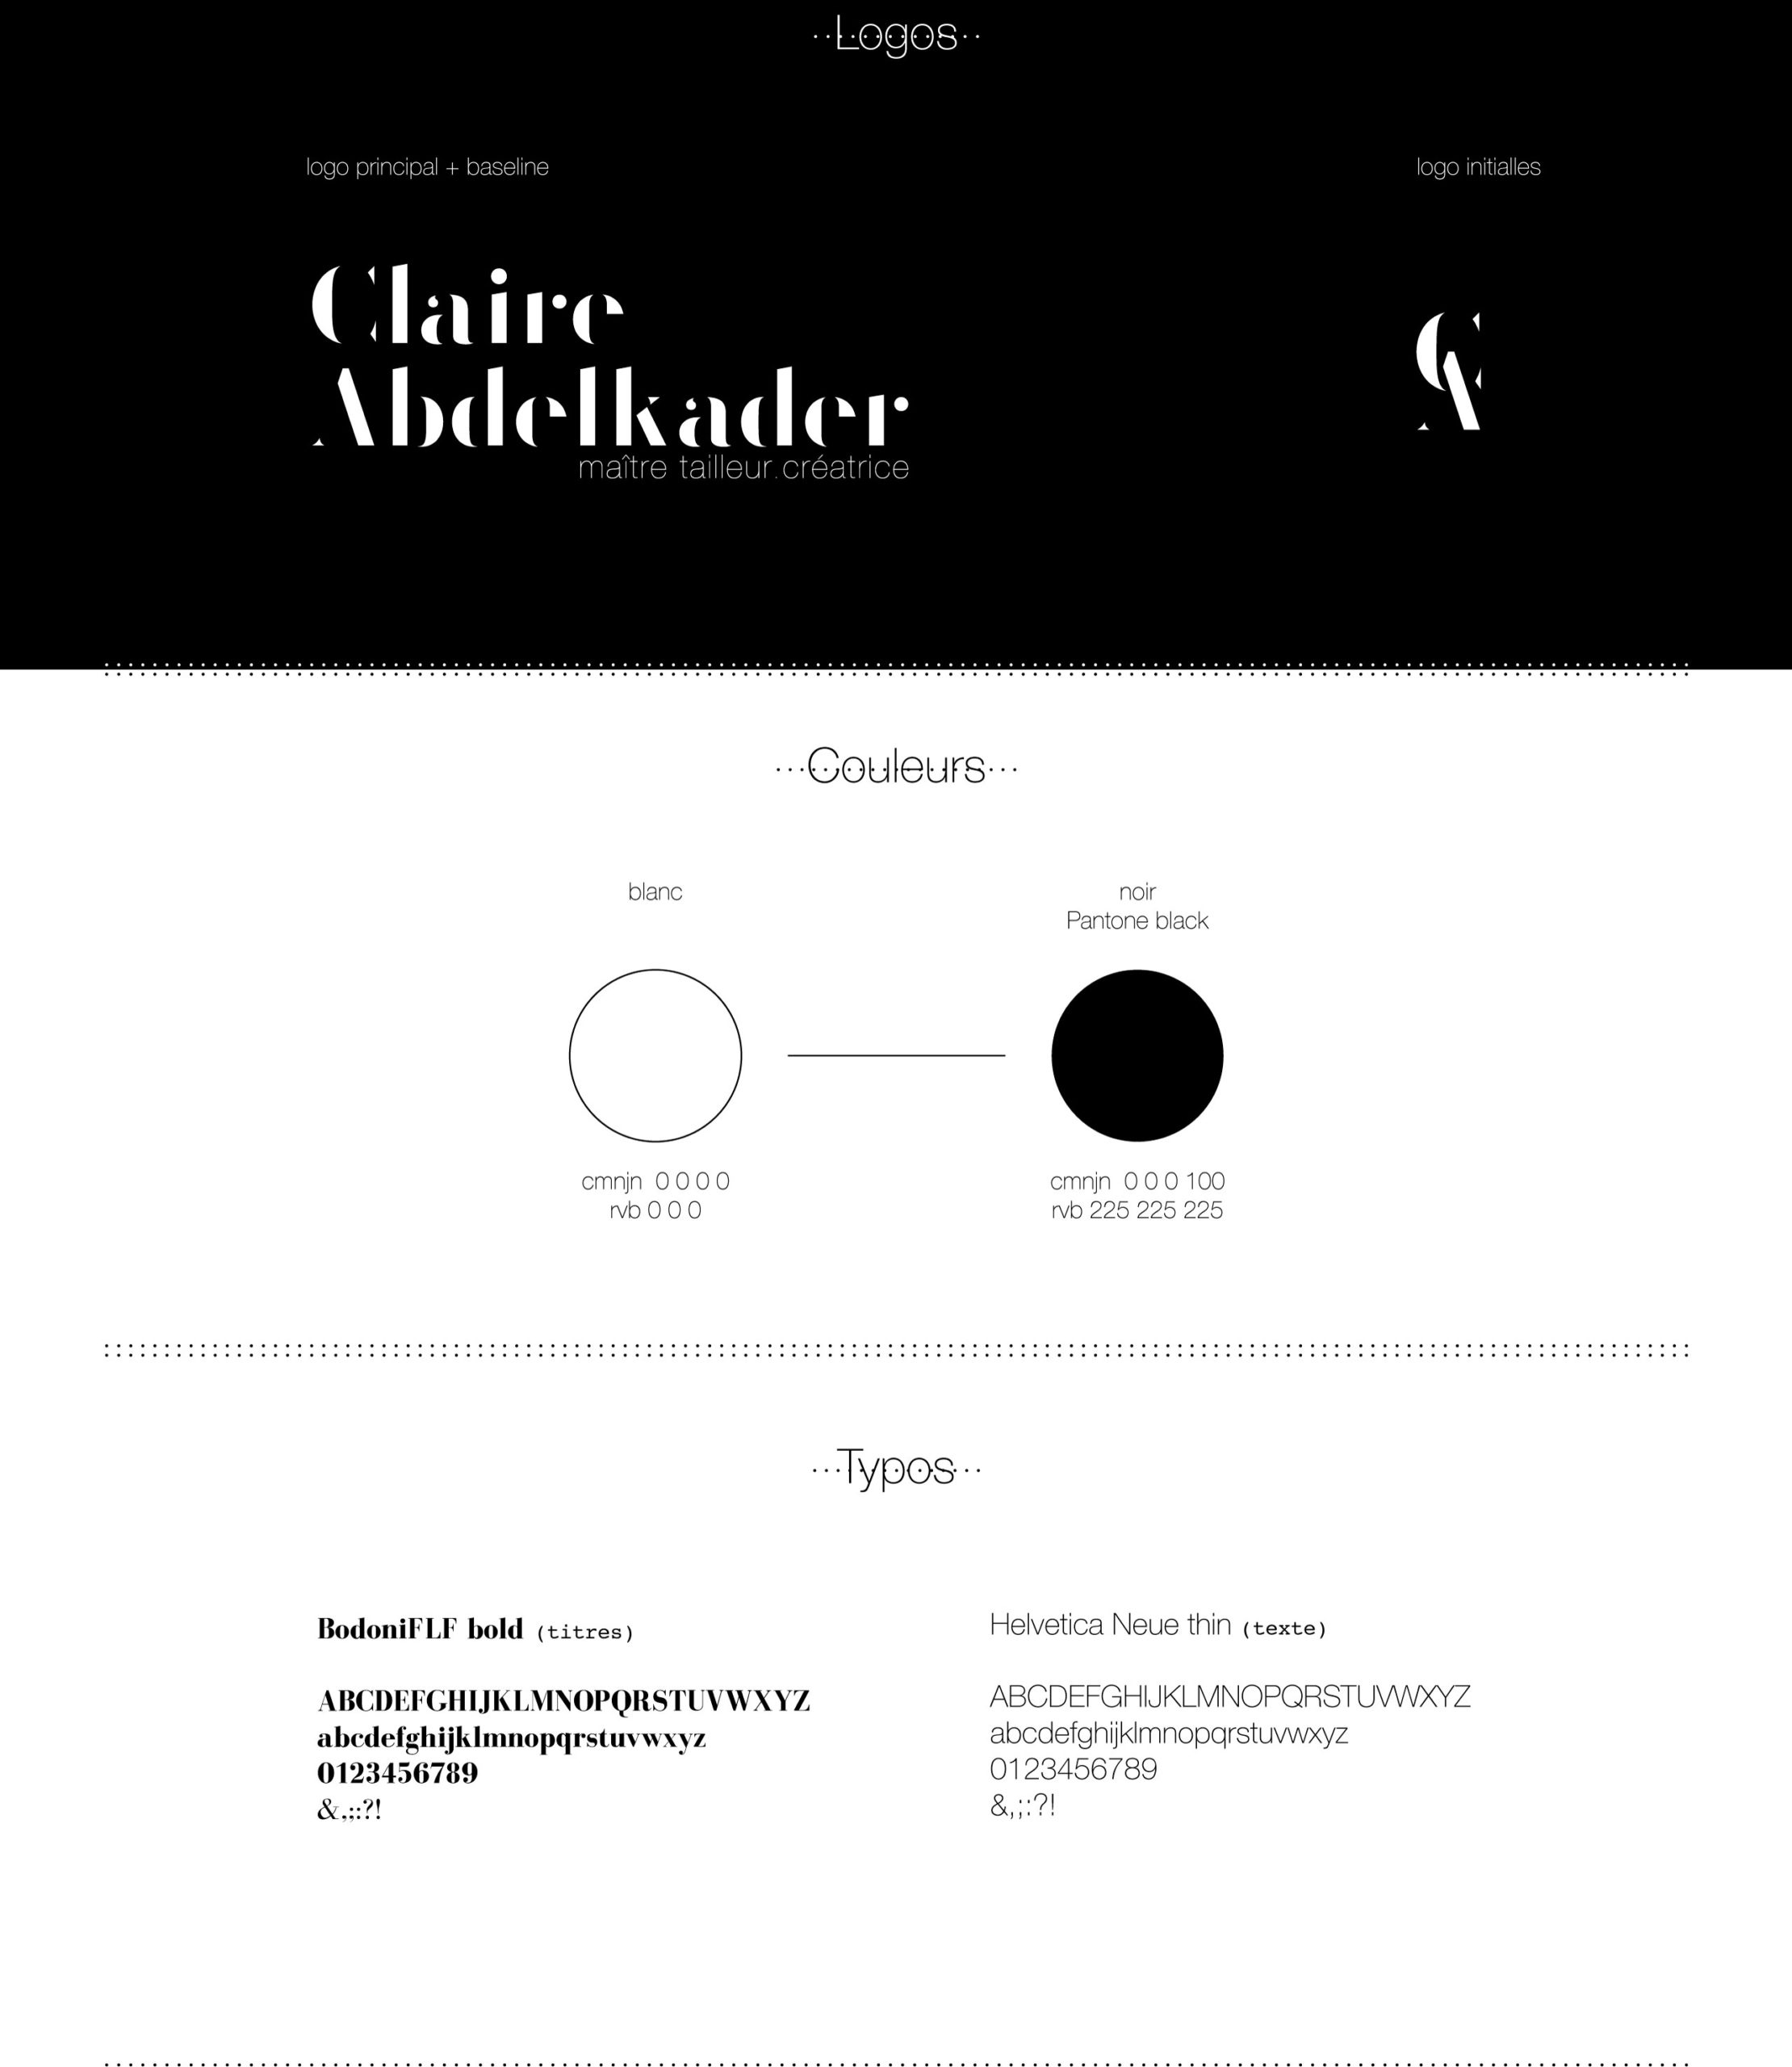 Claire Abldelkader logo couleur typo